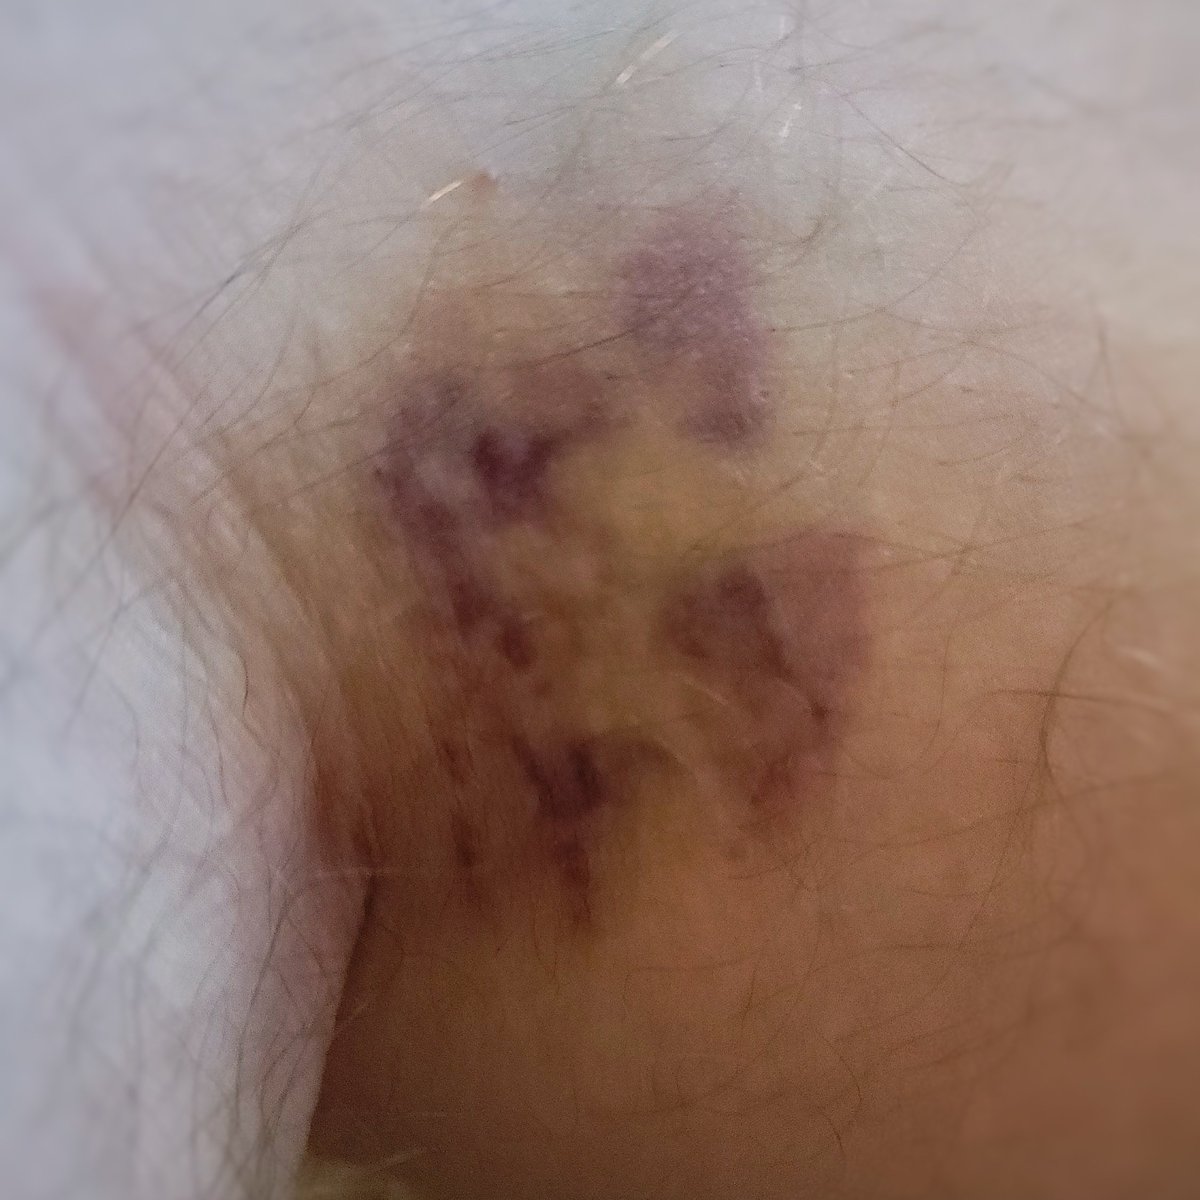 Damnit. I guess I was sitting weirdly with pressure under my knee while gathering and reading through COVID studies overnight. Shit. Anyone else bruise from bad or strange posture? 😔